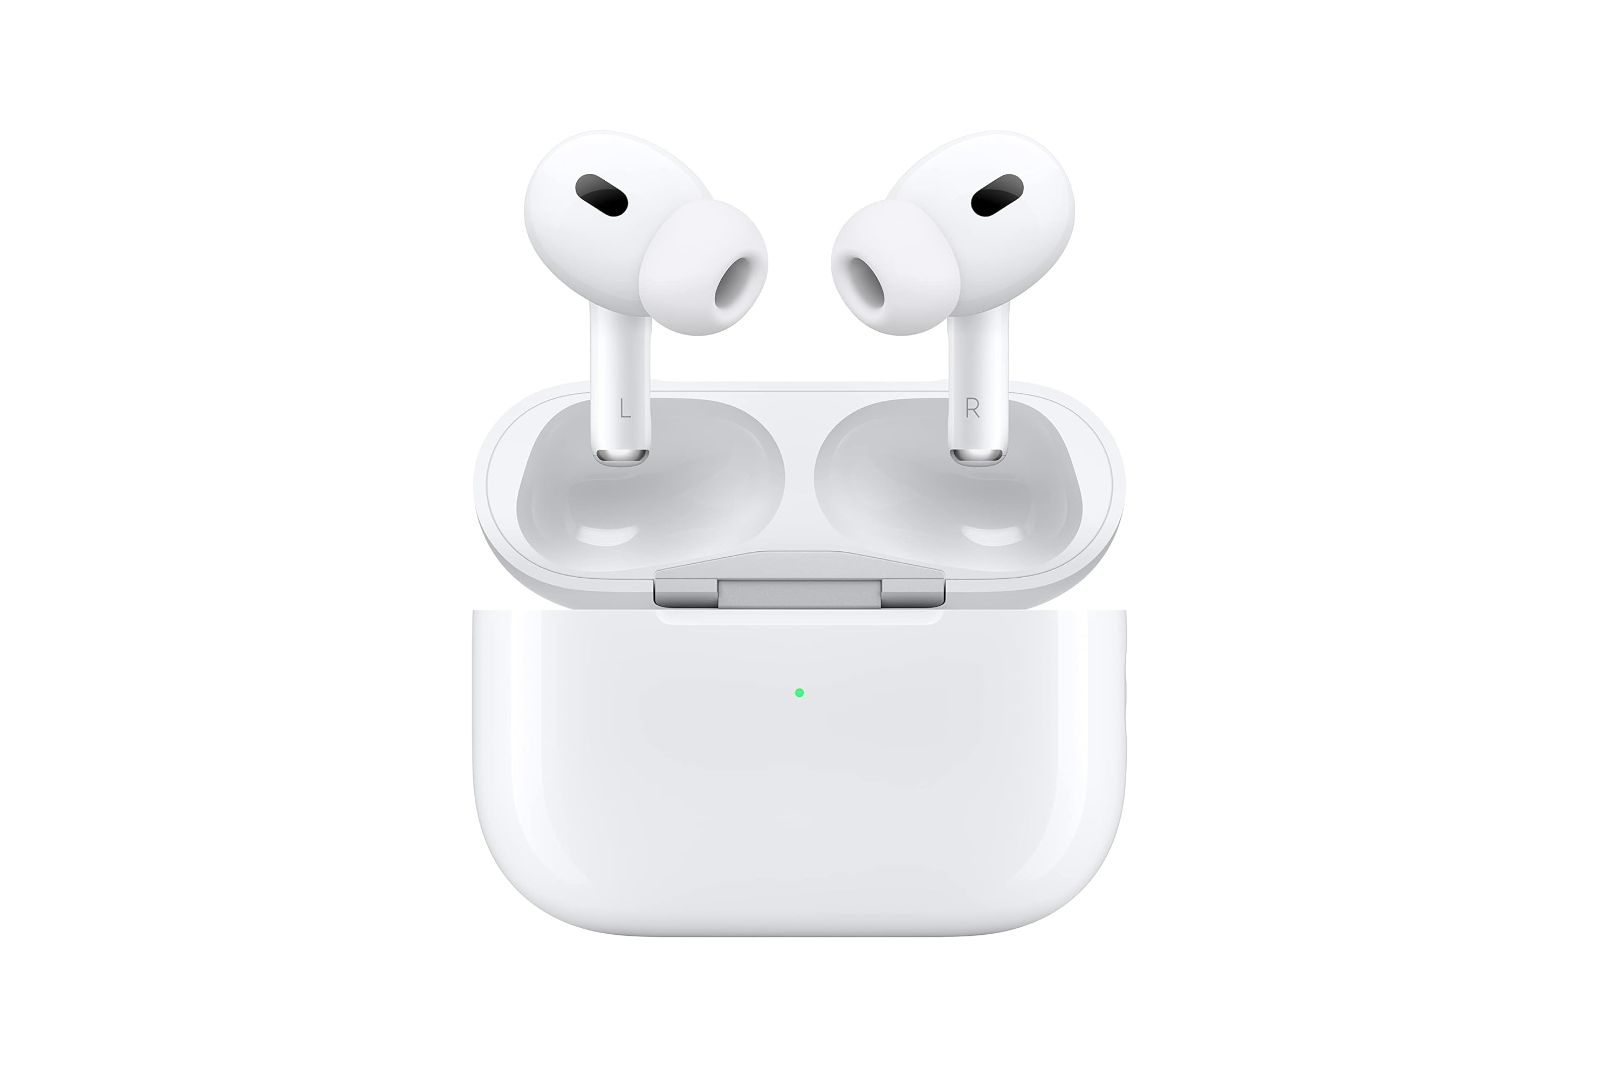 Two white wireless earbuds floating above an open white charging case.